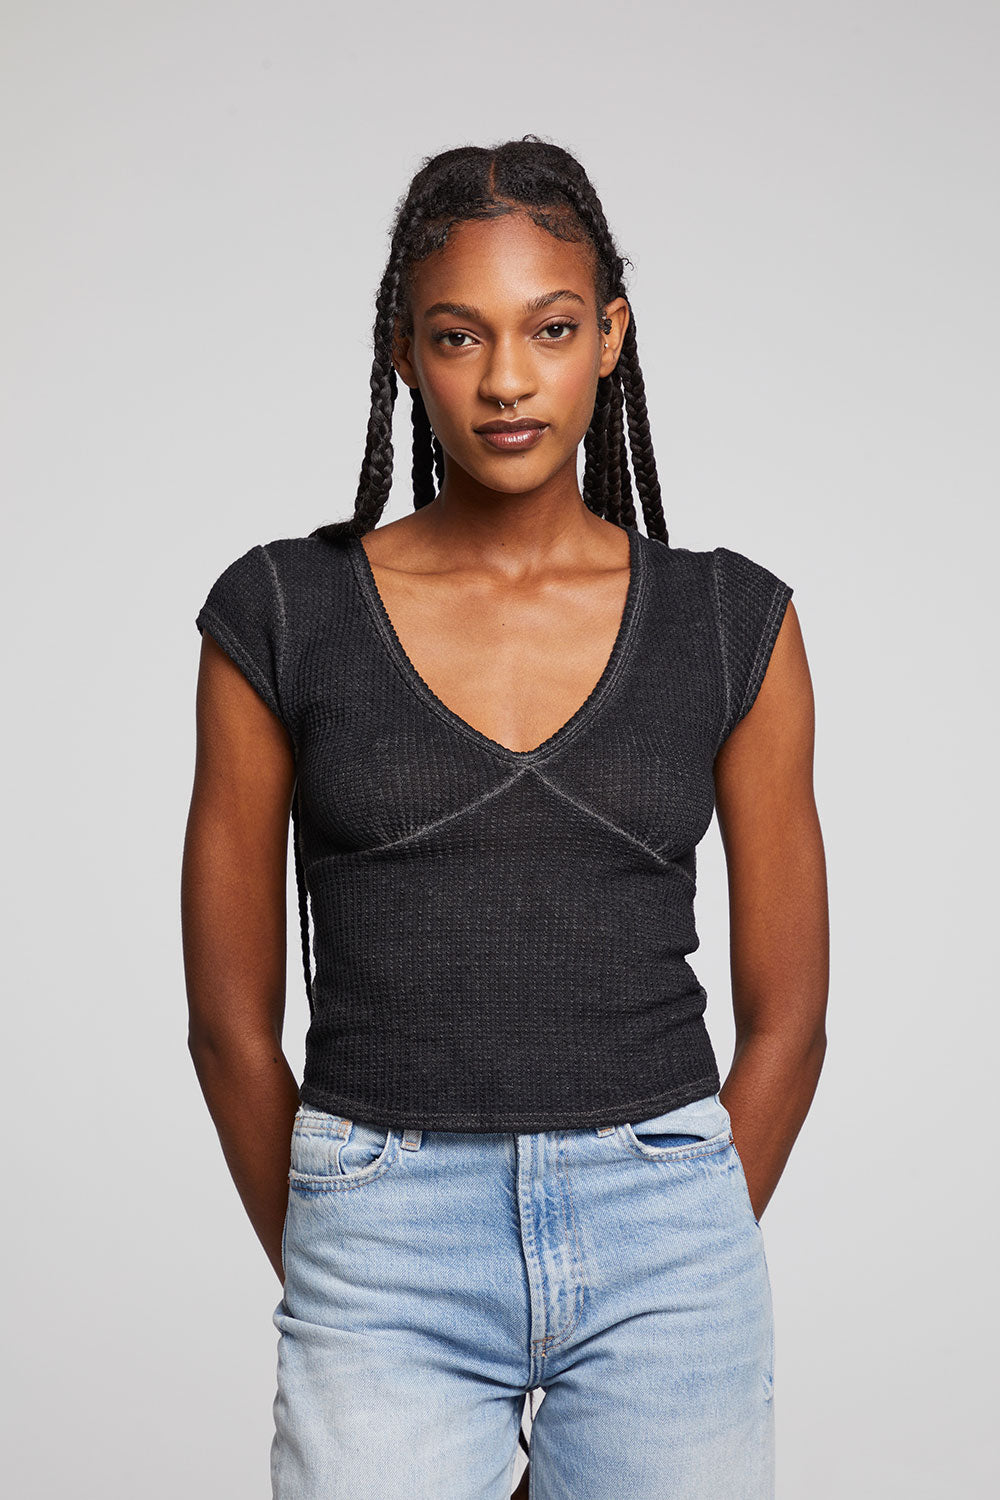 Page Licorice Tee WOMENS chaserbrand